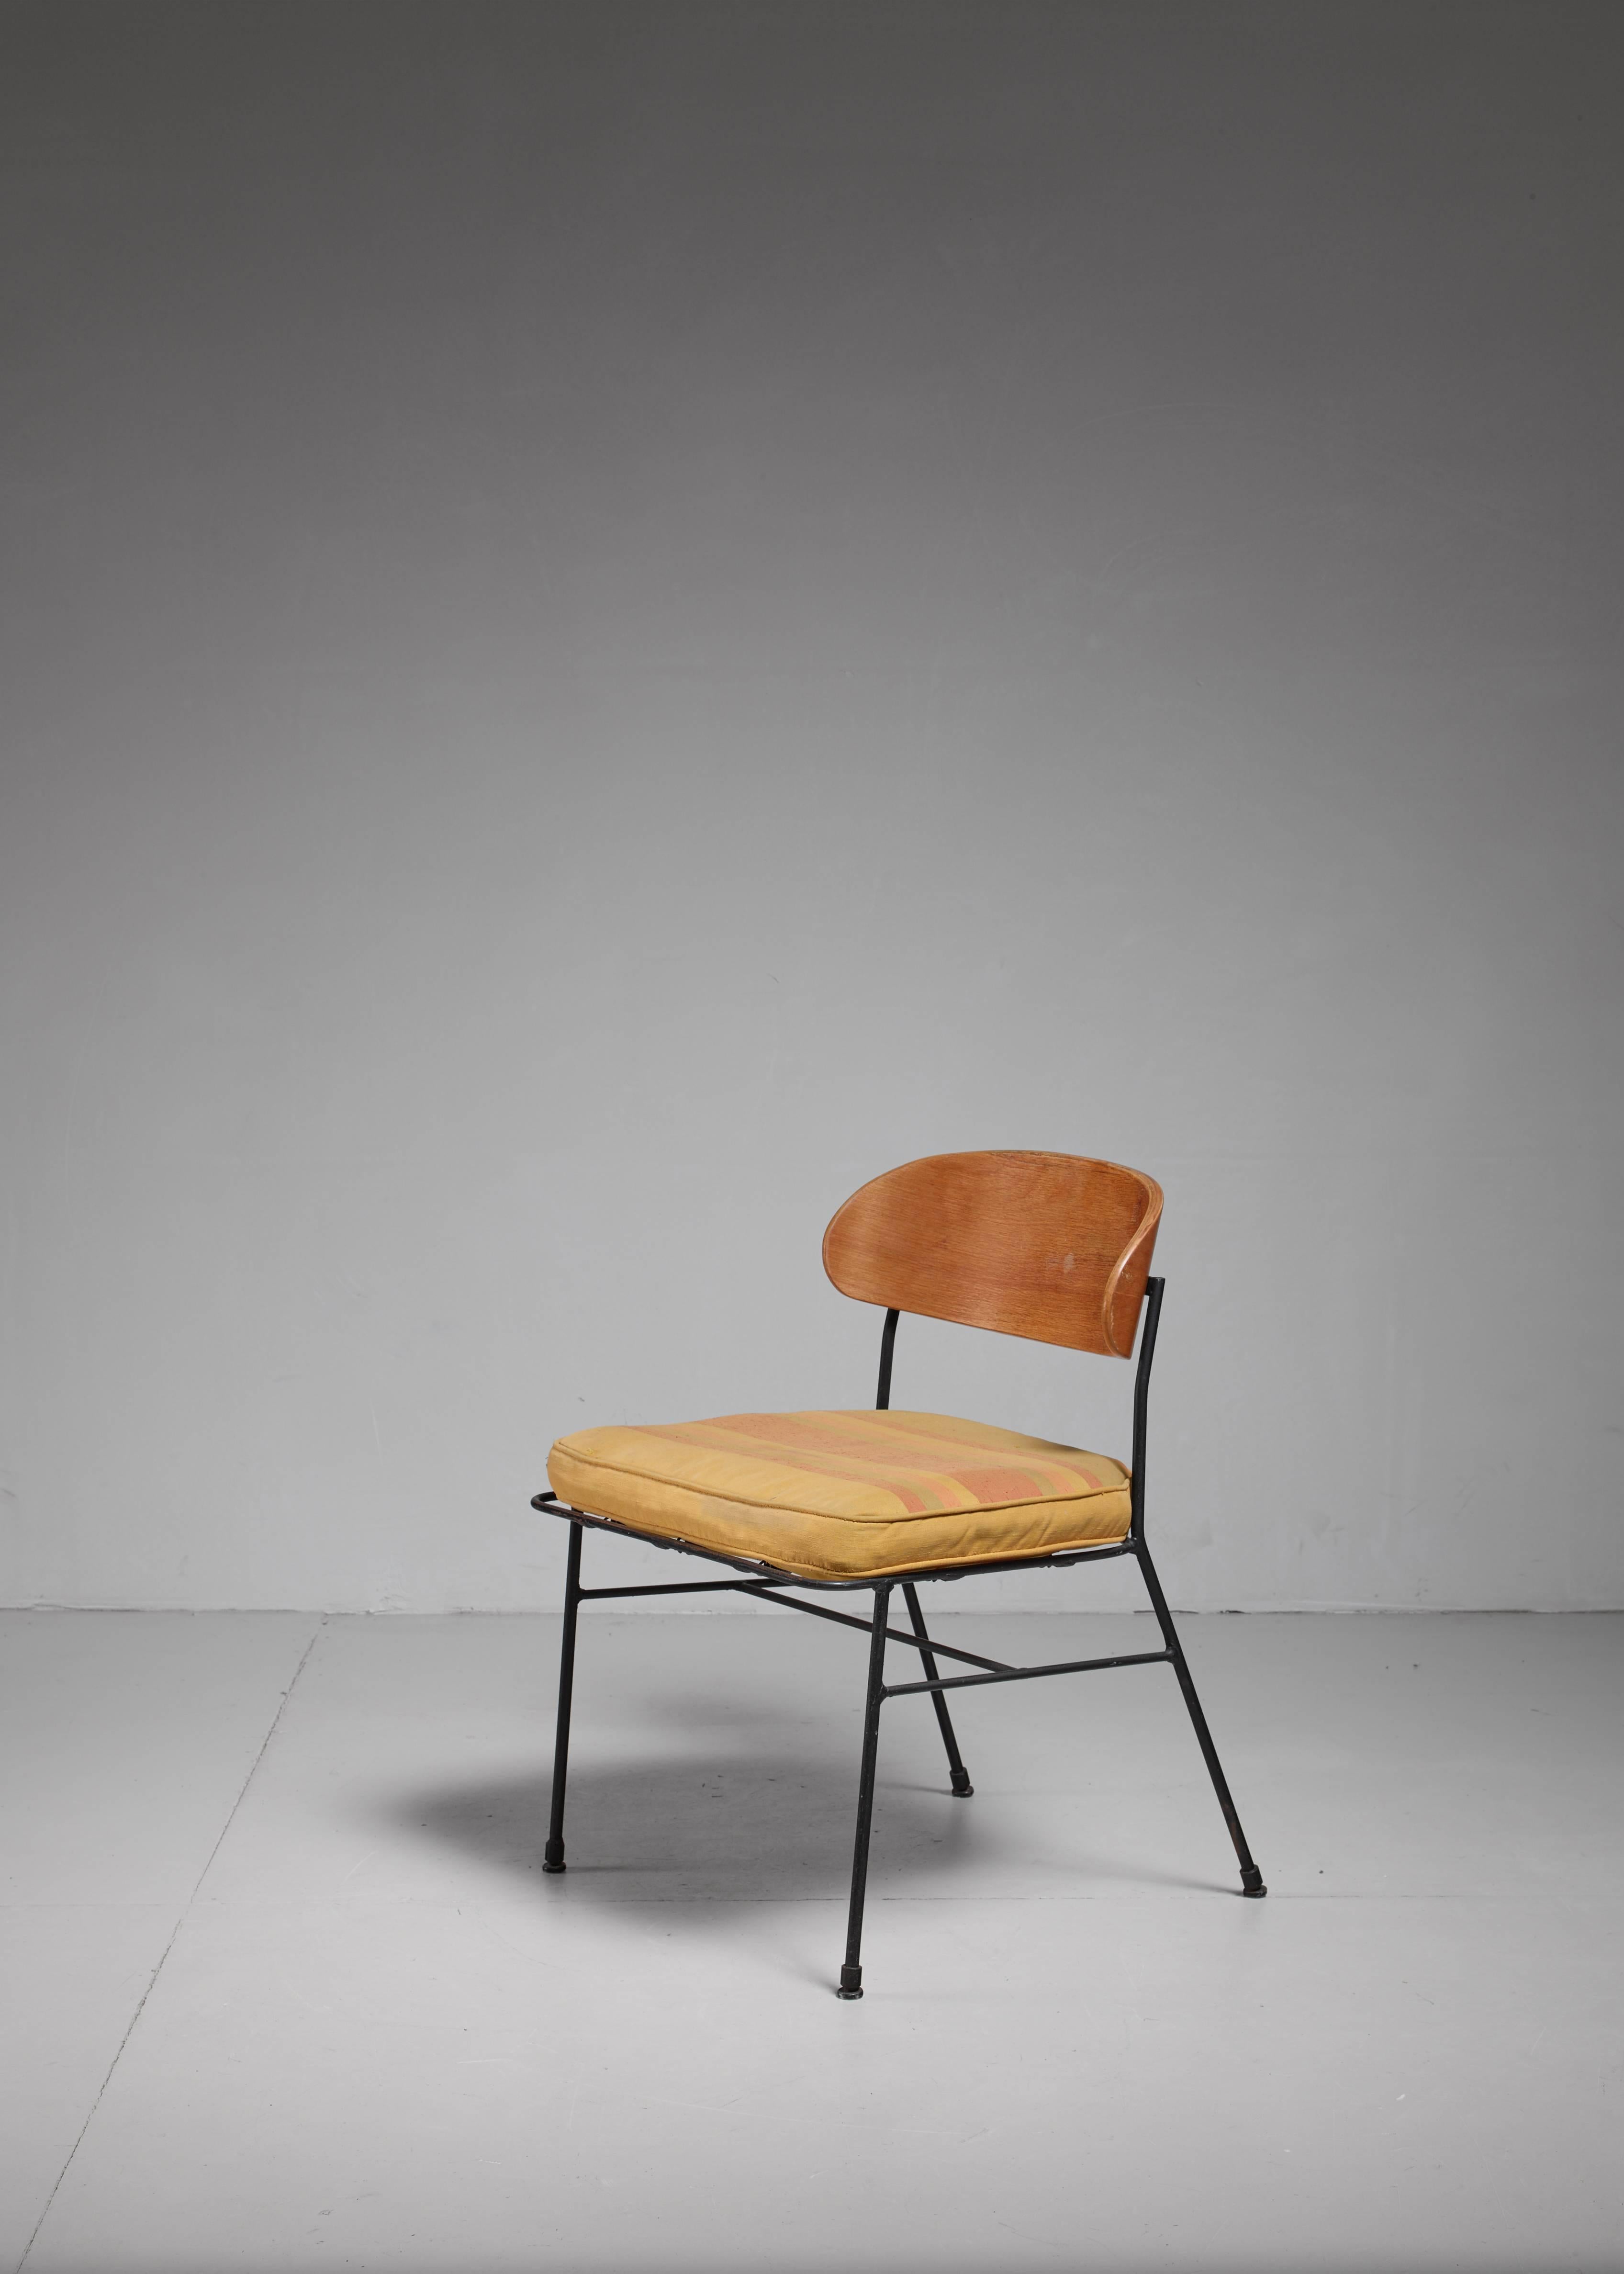 A 1950s chair, made of a black lacquered iron frame with a bentwood seating and backrest. The chair comes with a yellow/orange cushion that has been professionally restored. Paul Laszlo design for Pacific Iron Products (L.A.) model No. 2100 from the